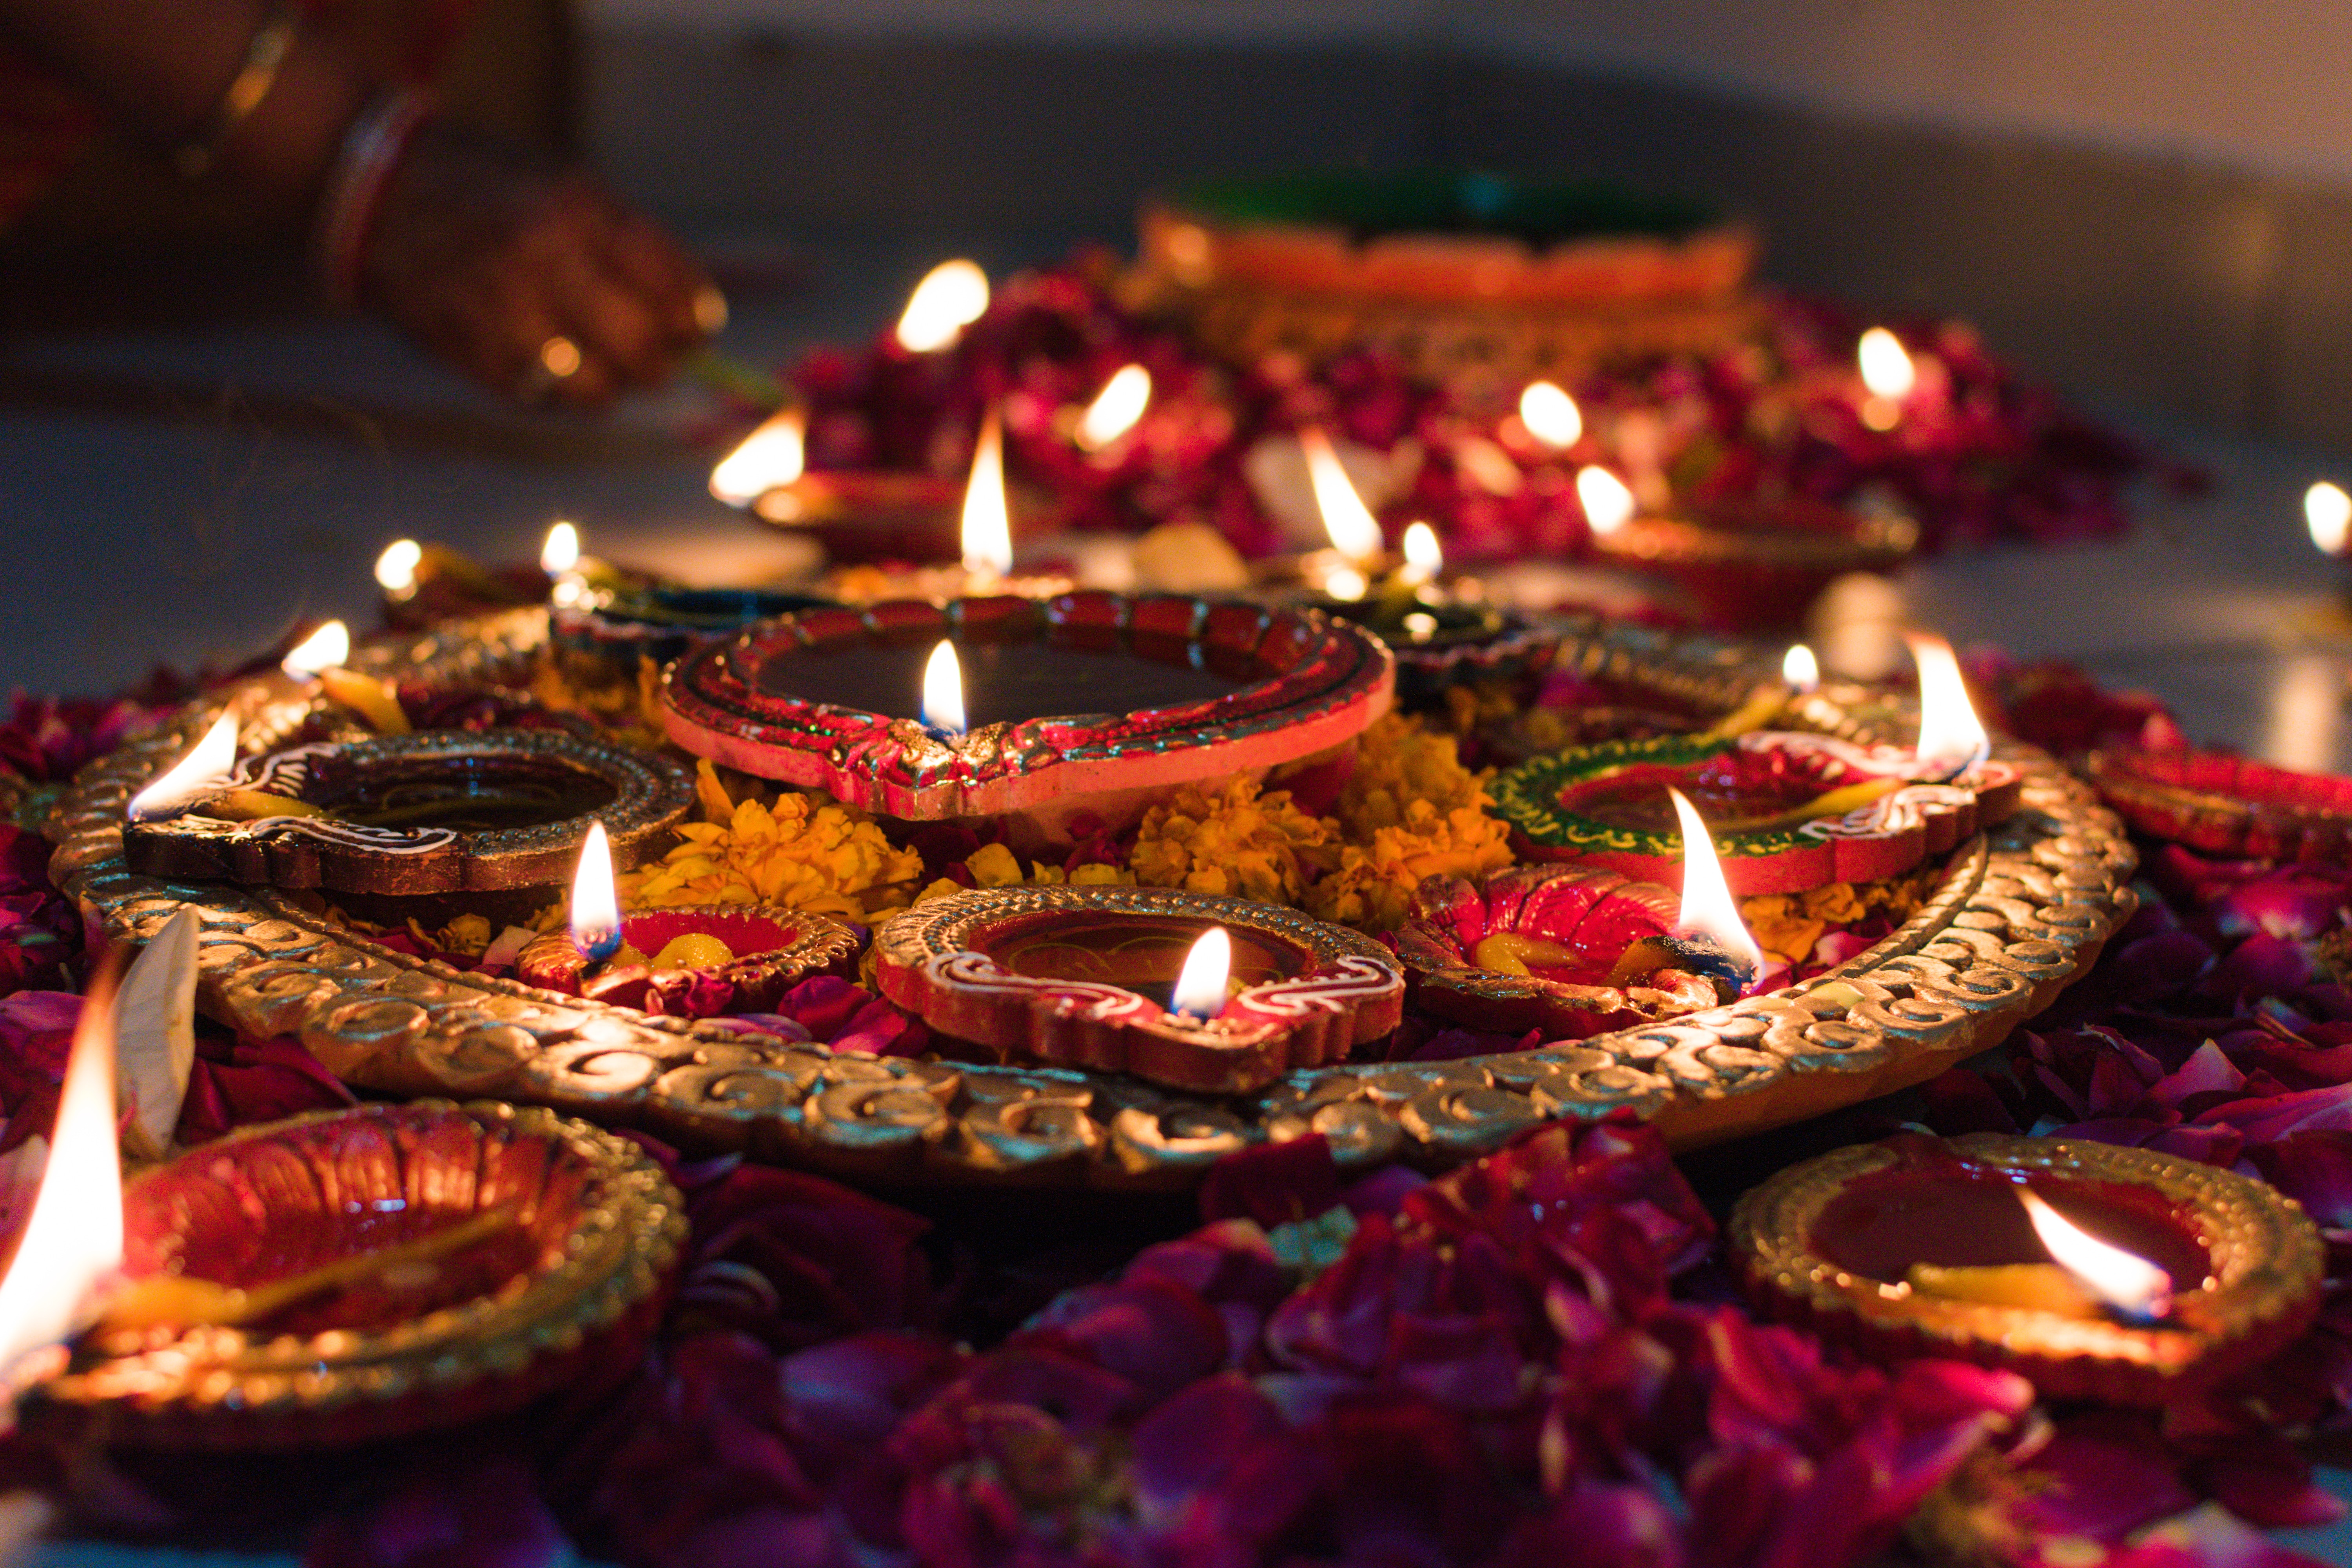 Several candles lit surrounded by a bed of pink flowers